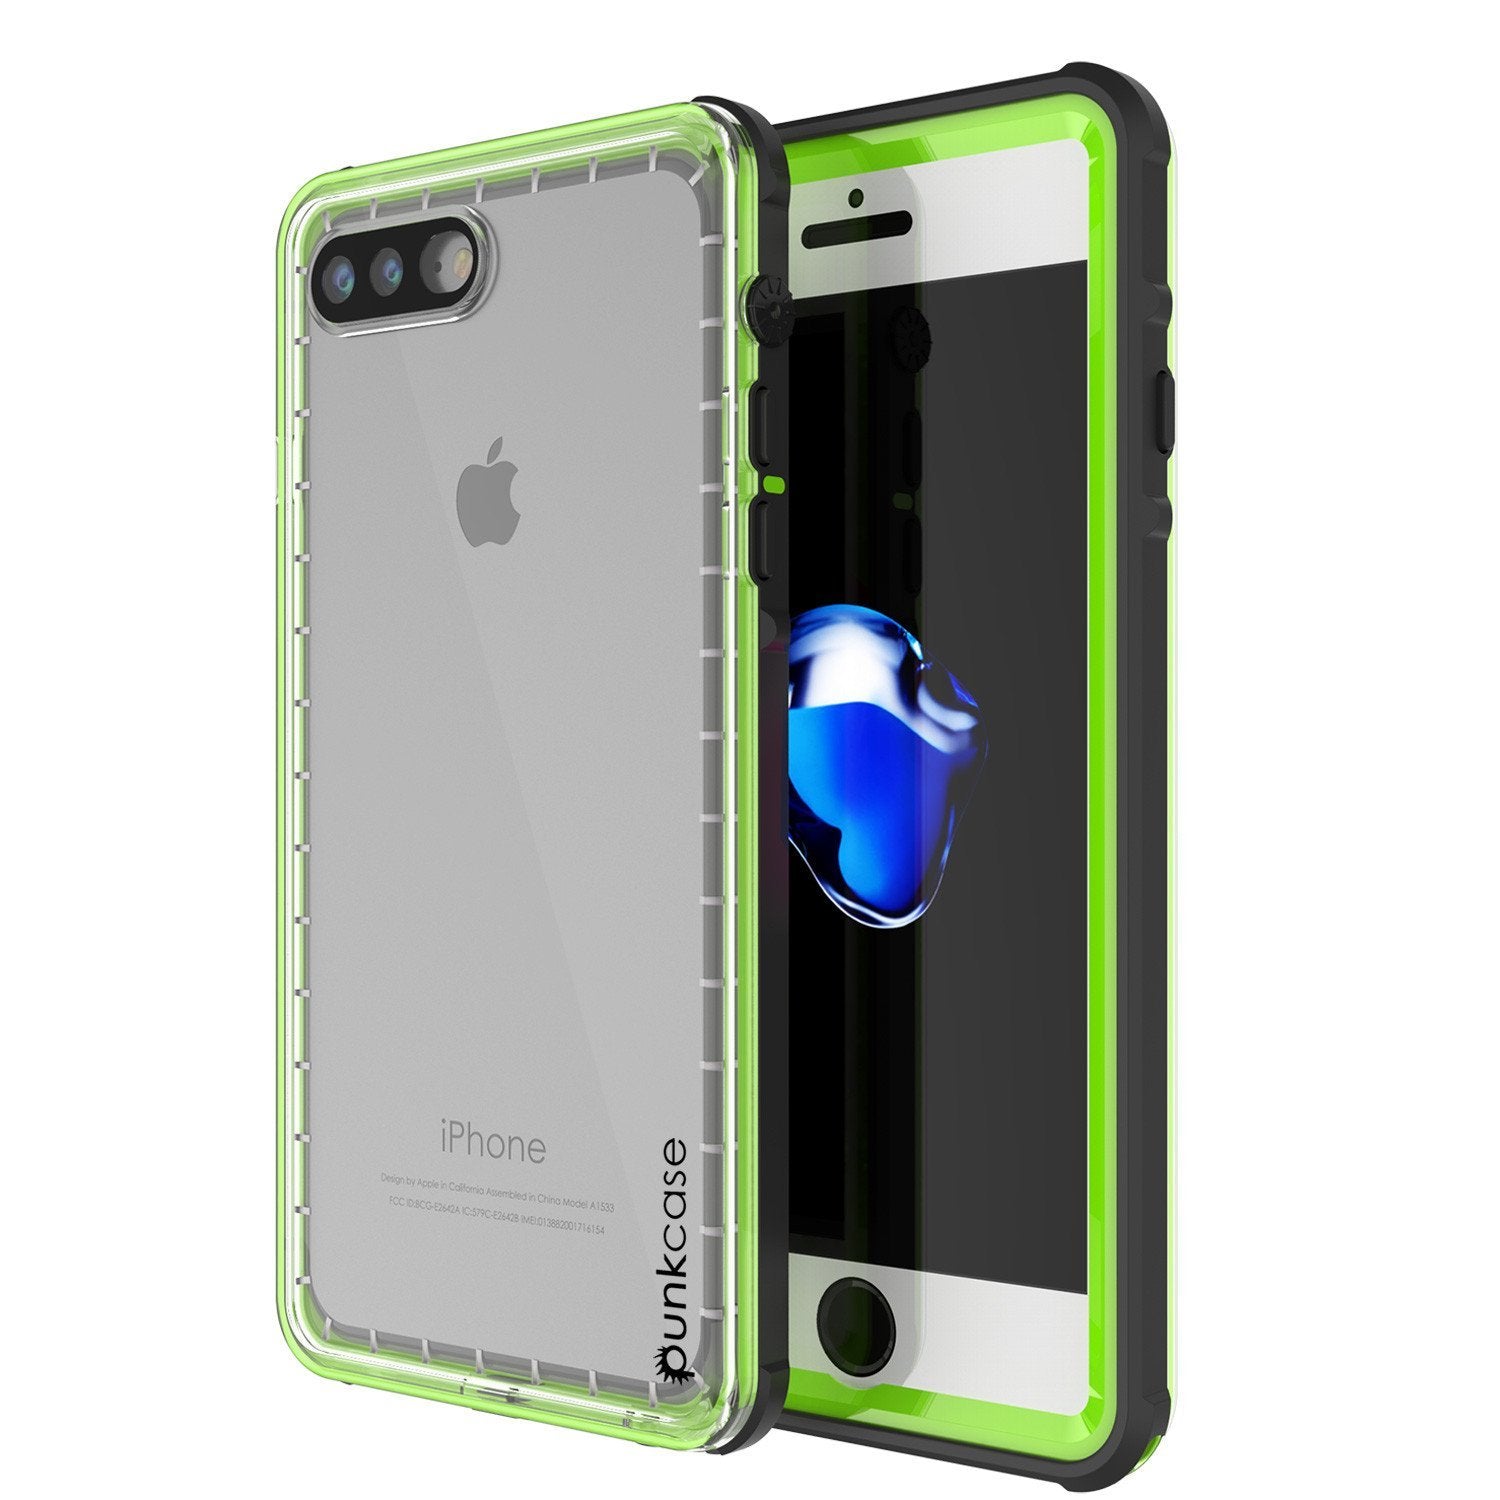 iPhone 8+ Plus Waterproof Case, PUNKcase CRYSTAL Light Green  W/ Attached Screen Protector  | Warranty